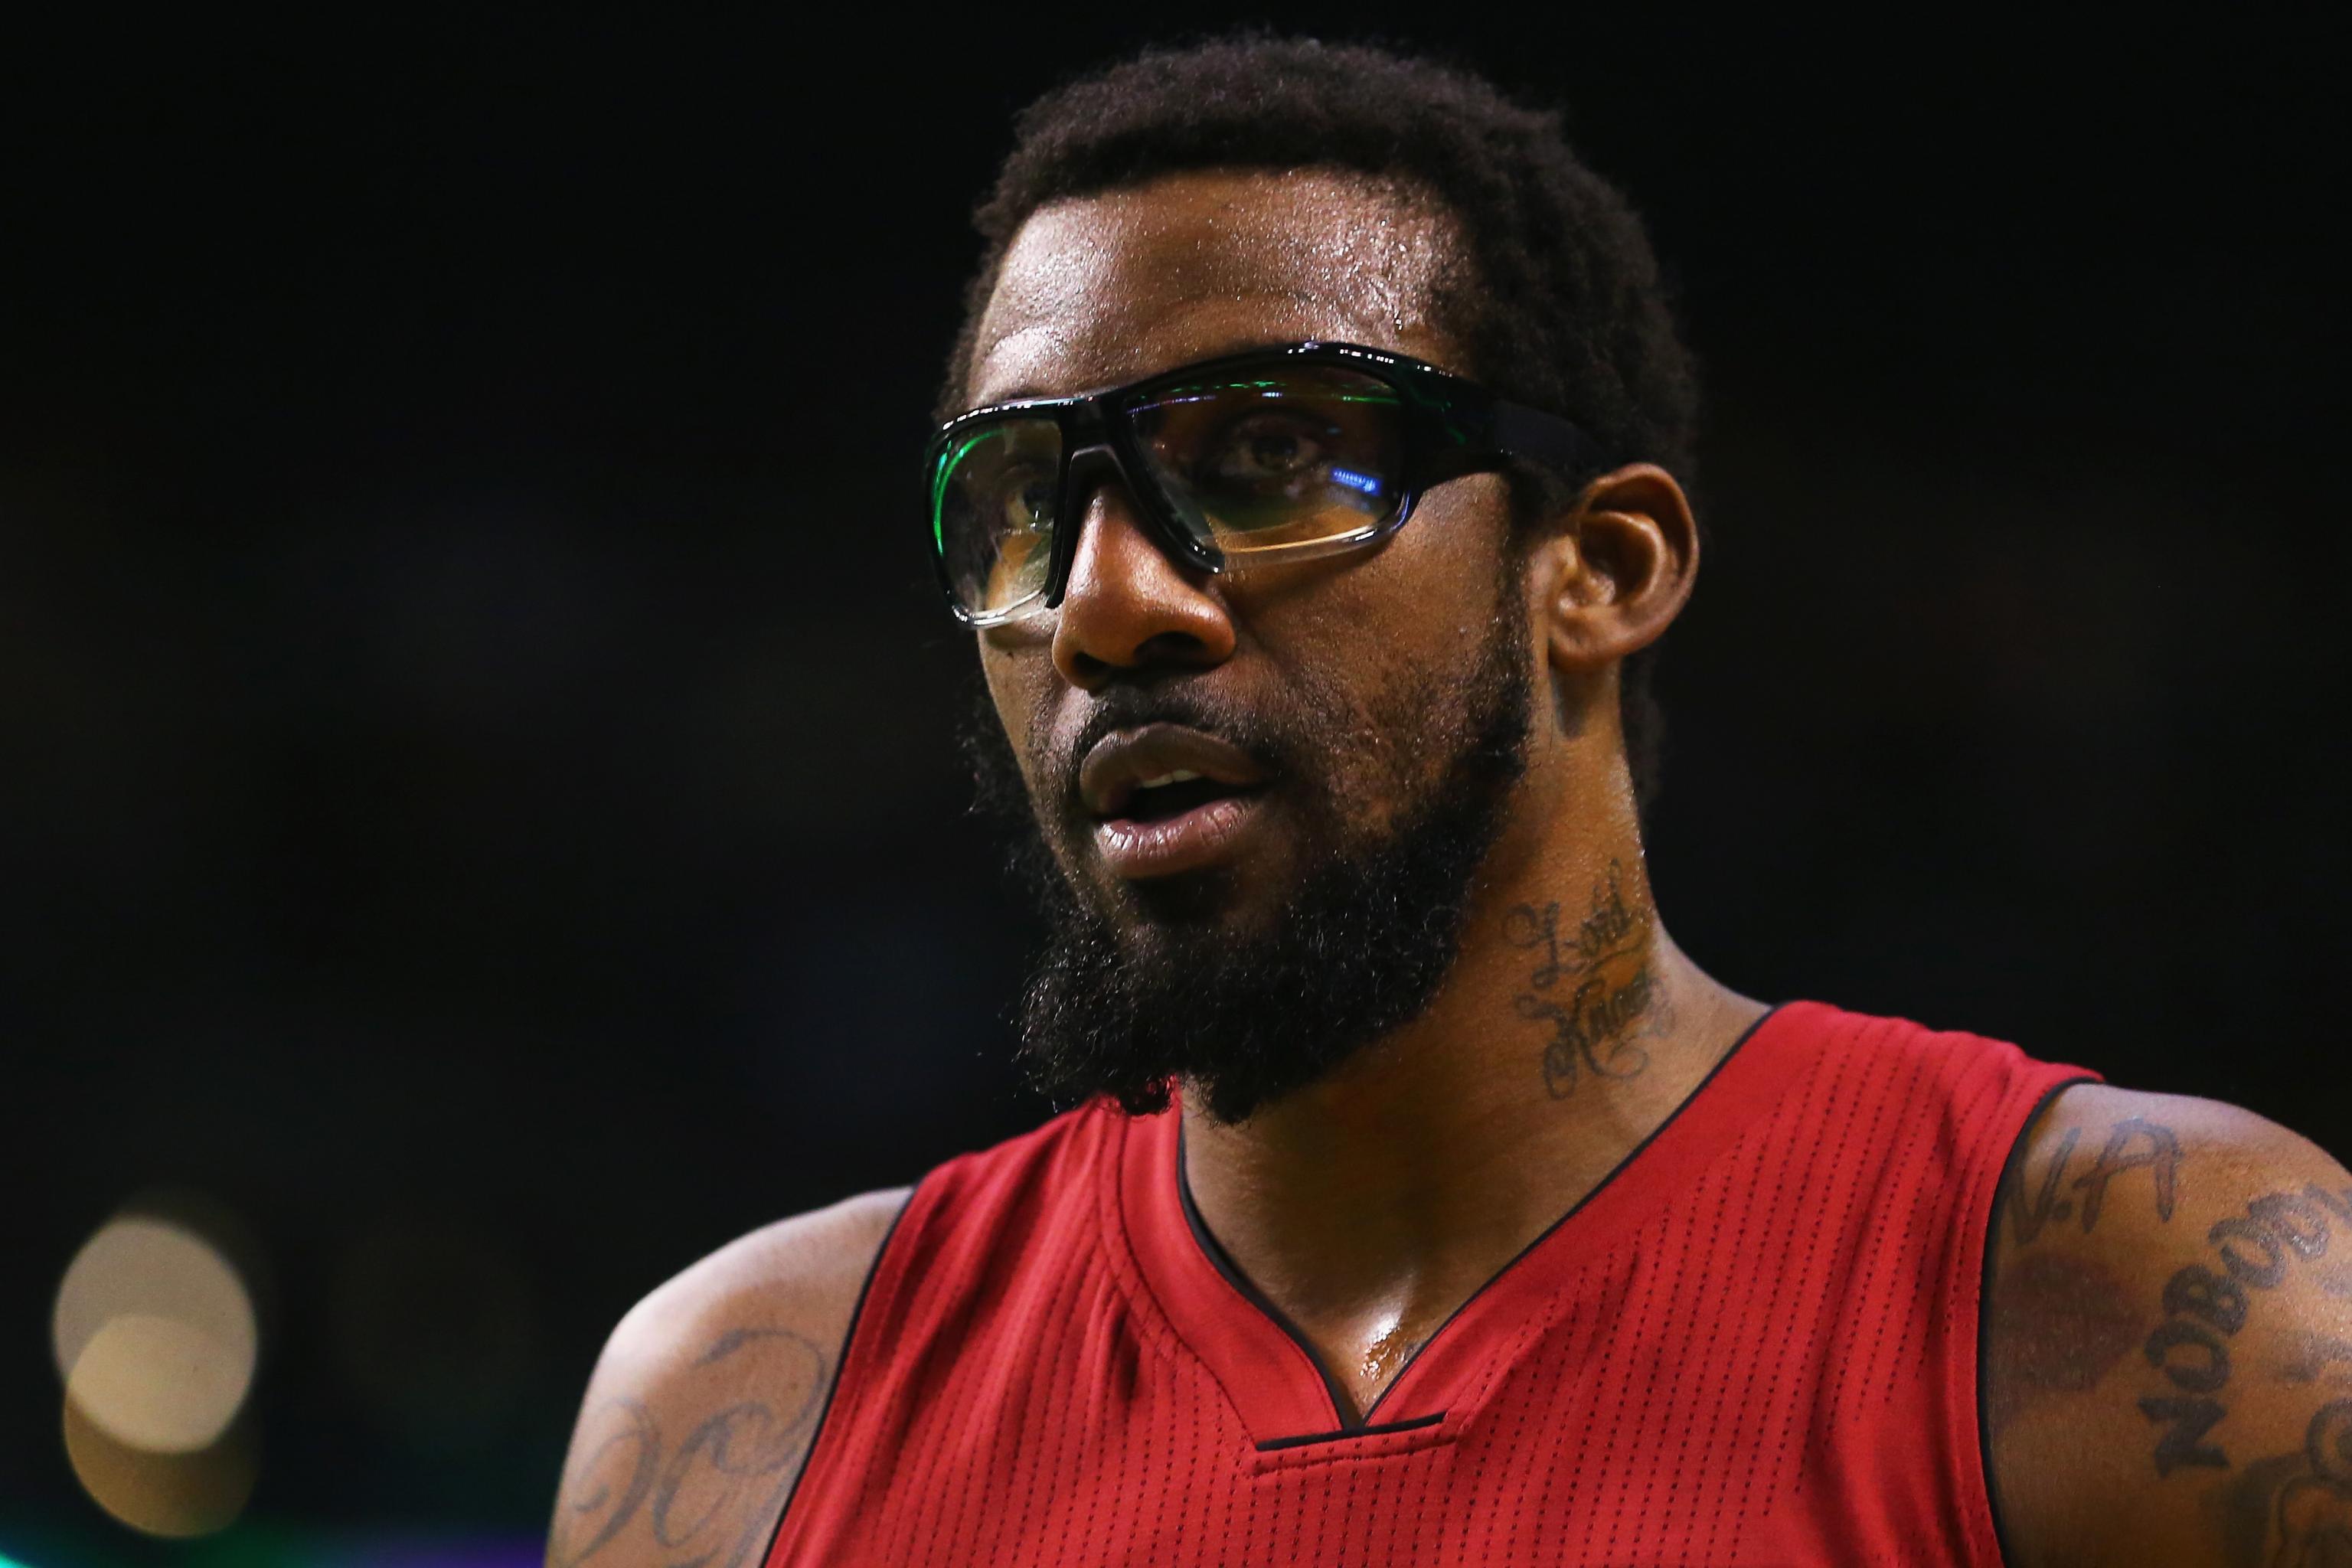 amare stoudemire now